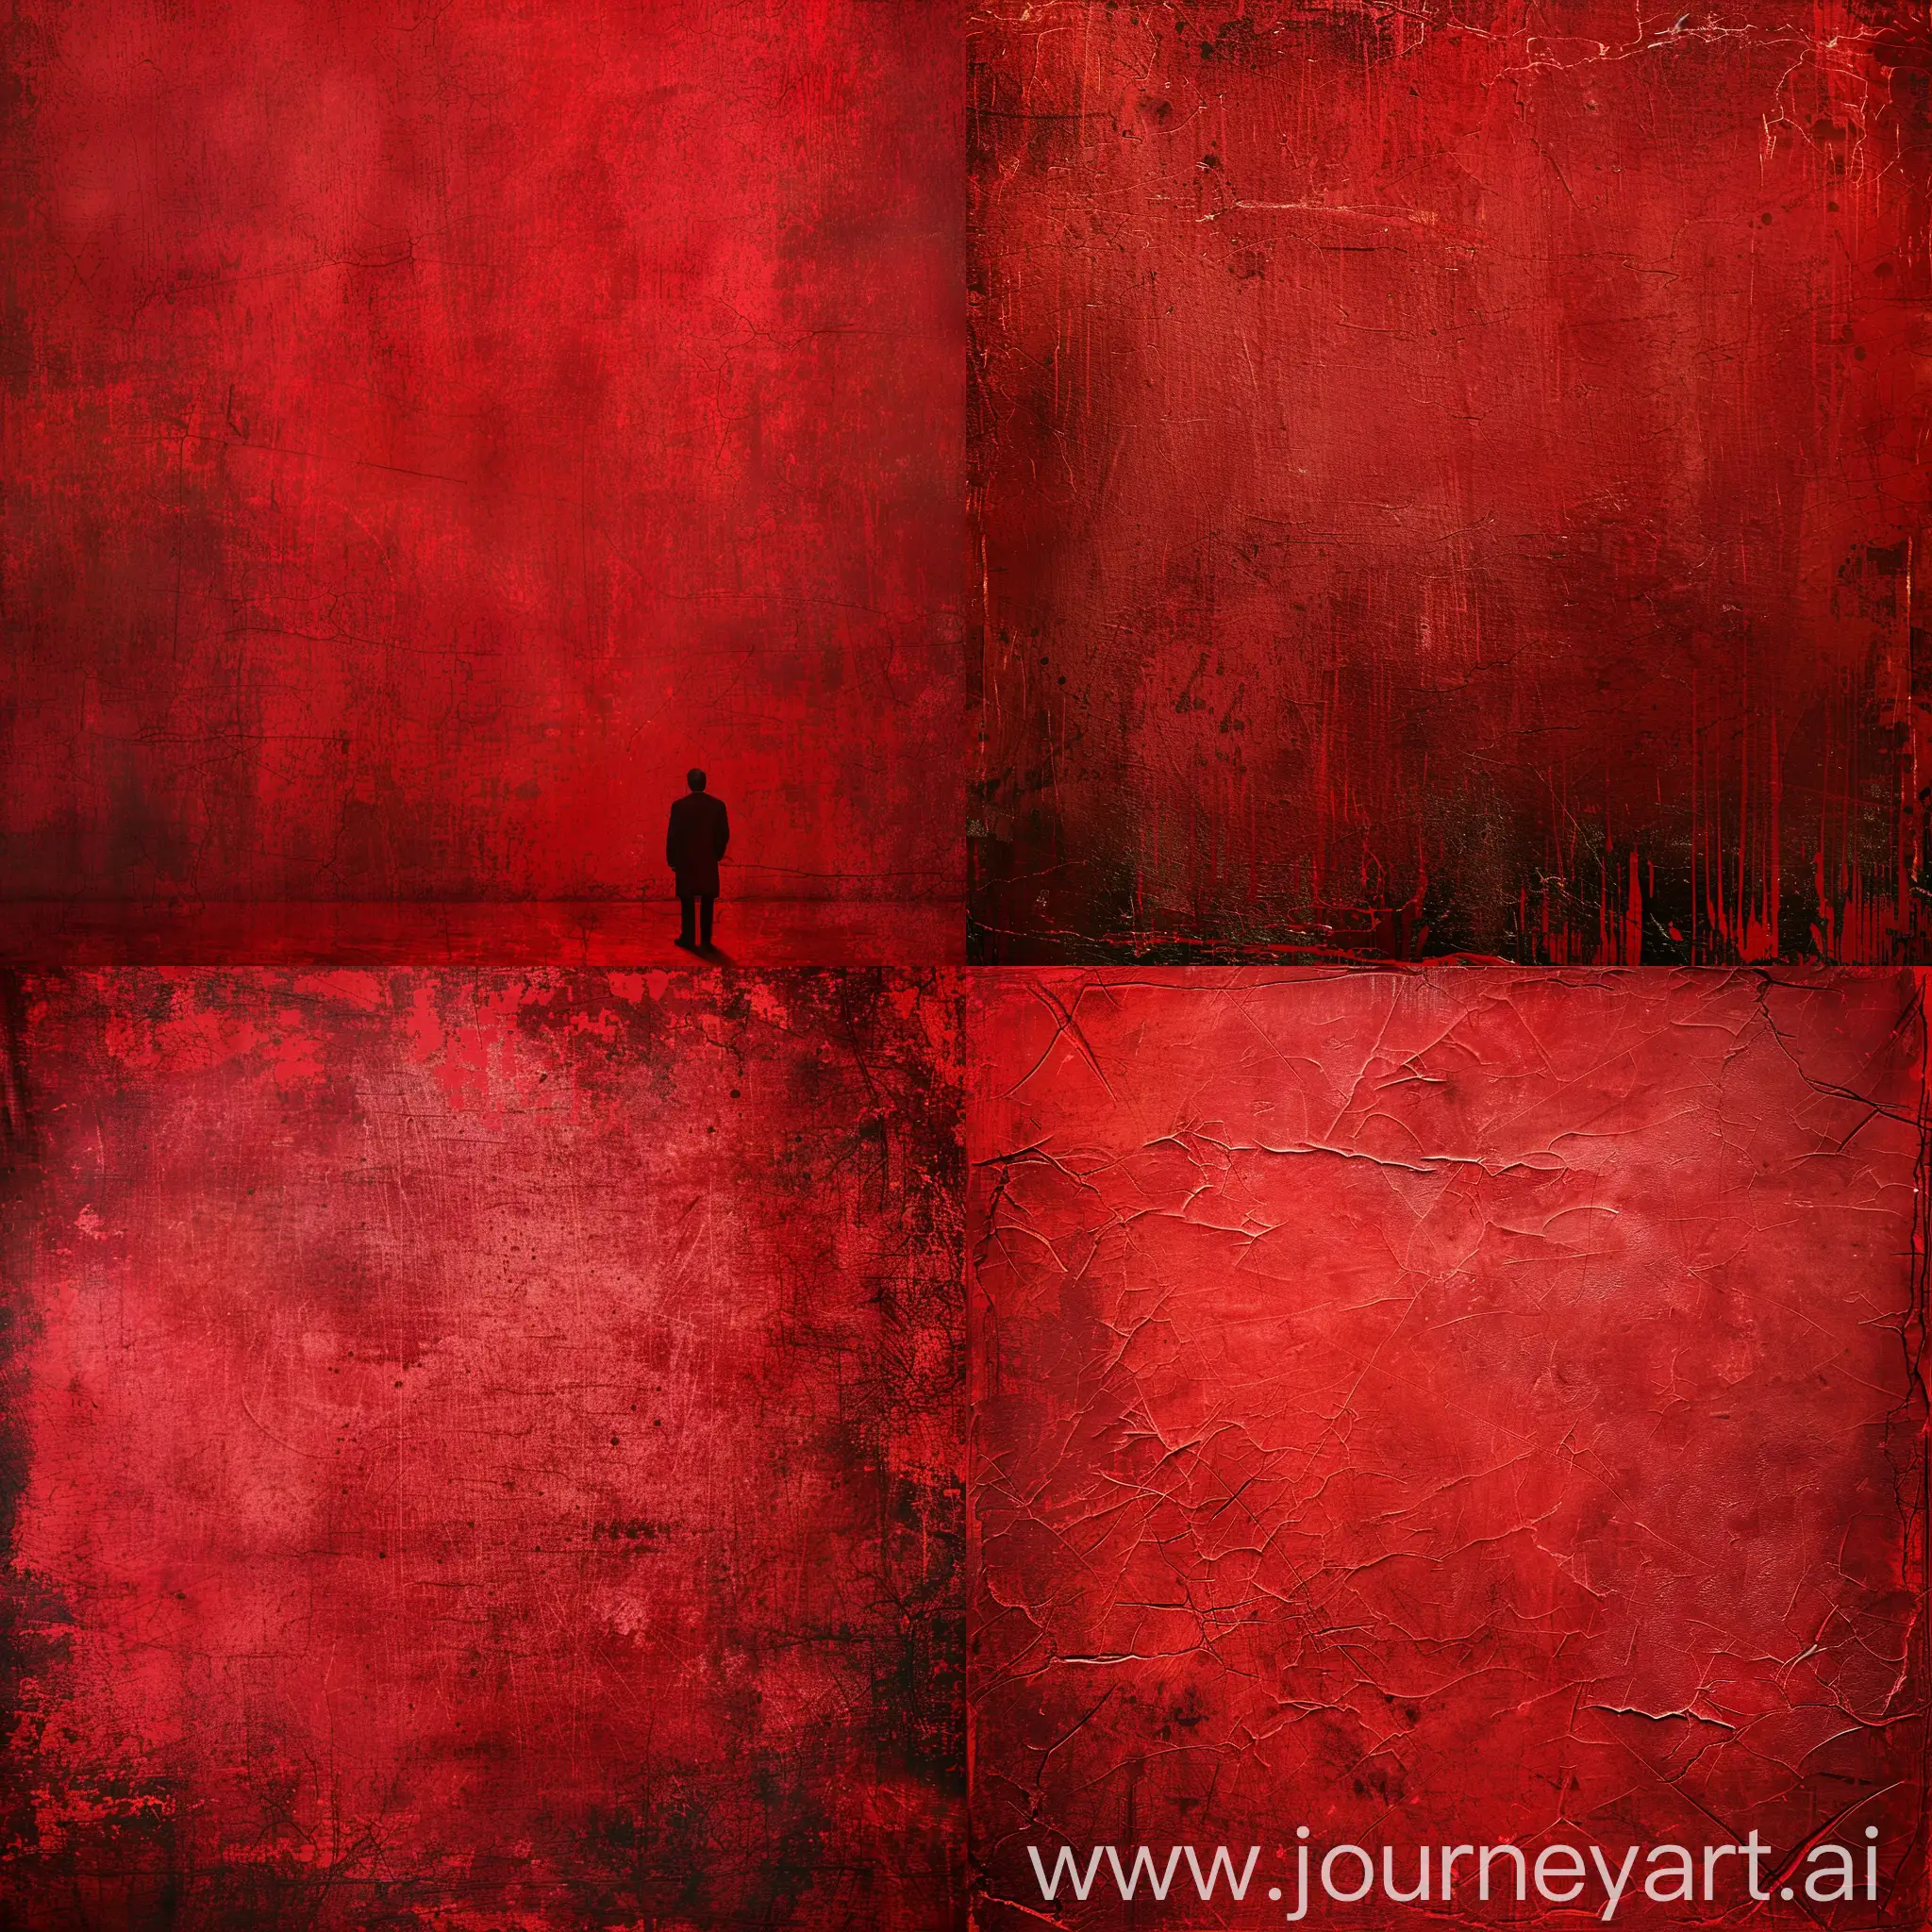 Intense-Crime-Drama-Atmosphere-Red-Textured-Movie-Poster-Background